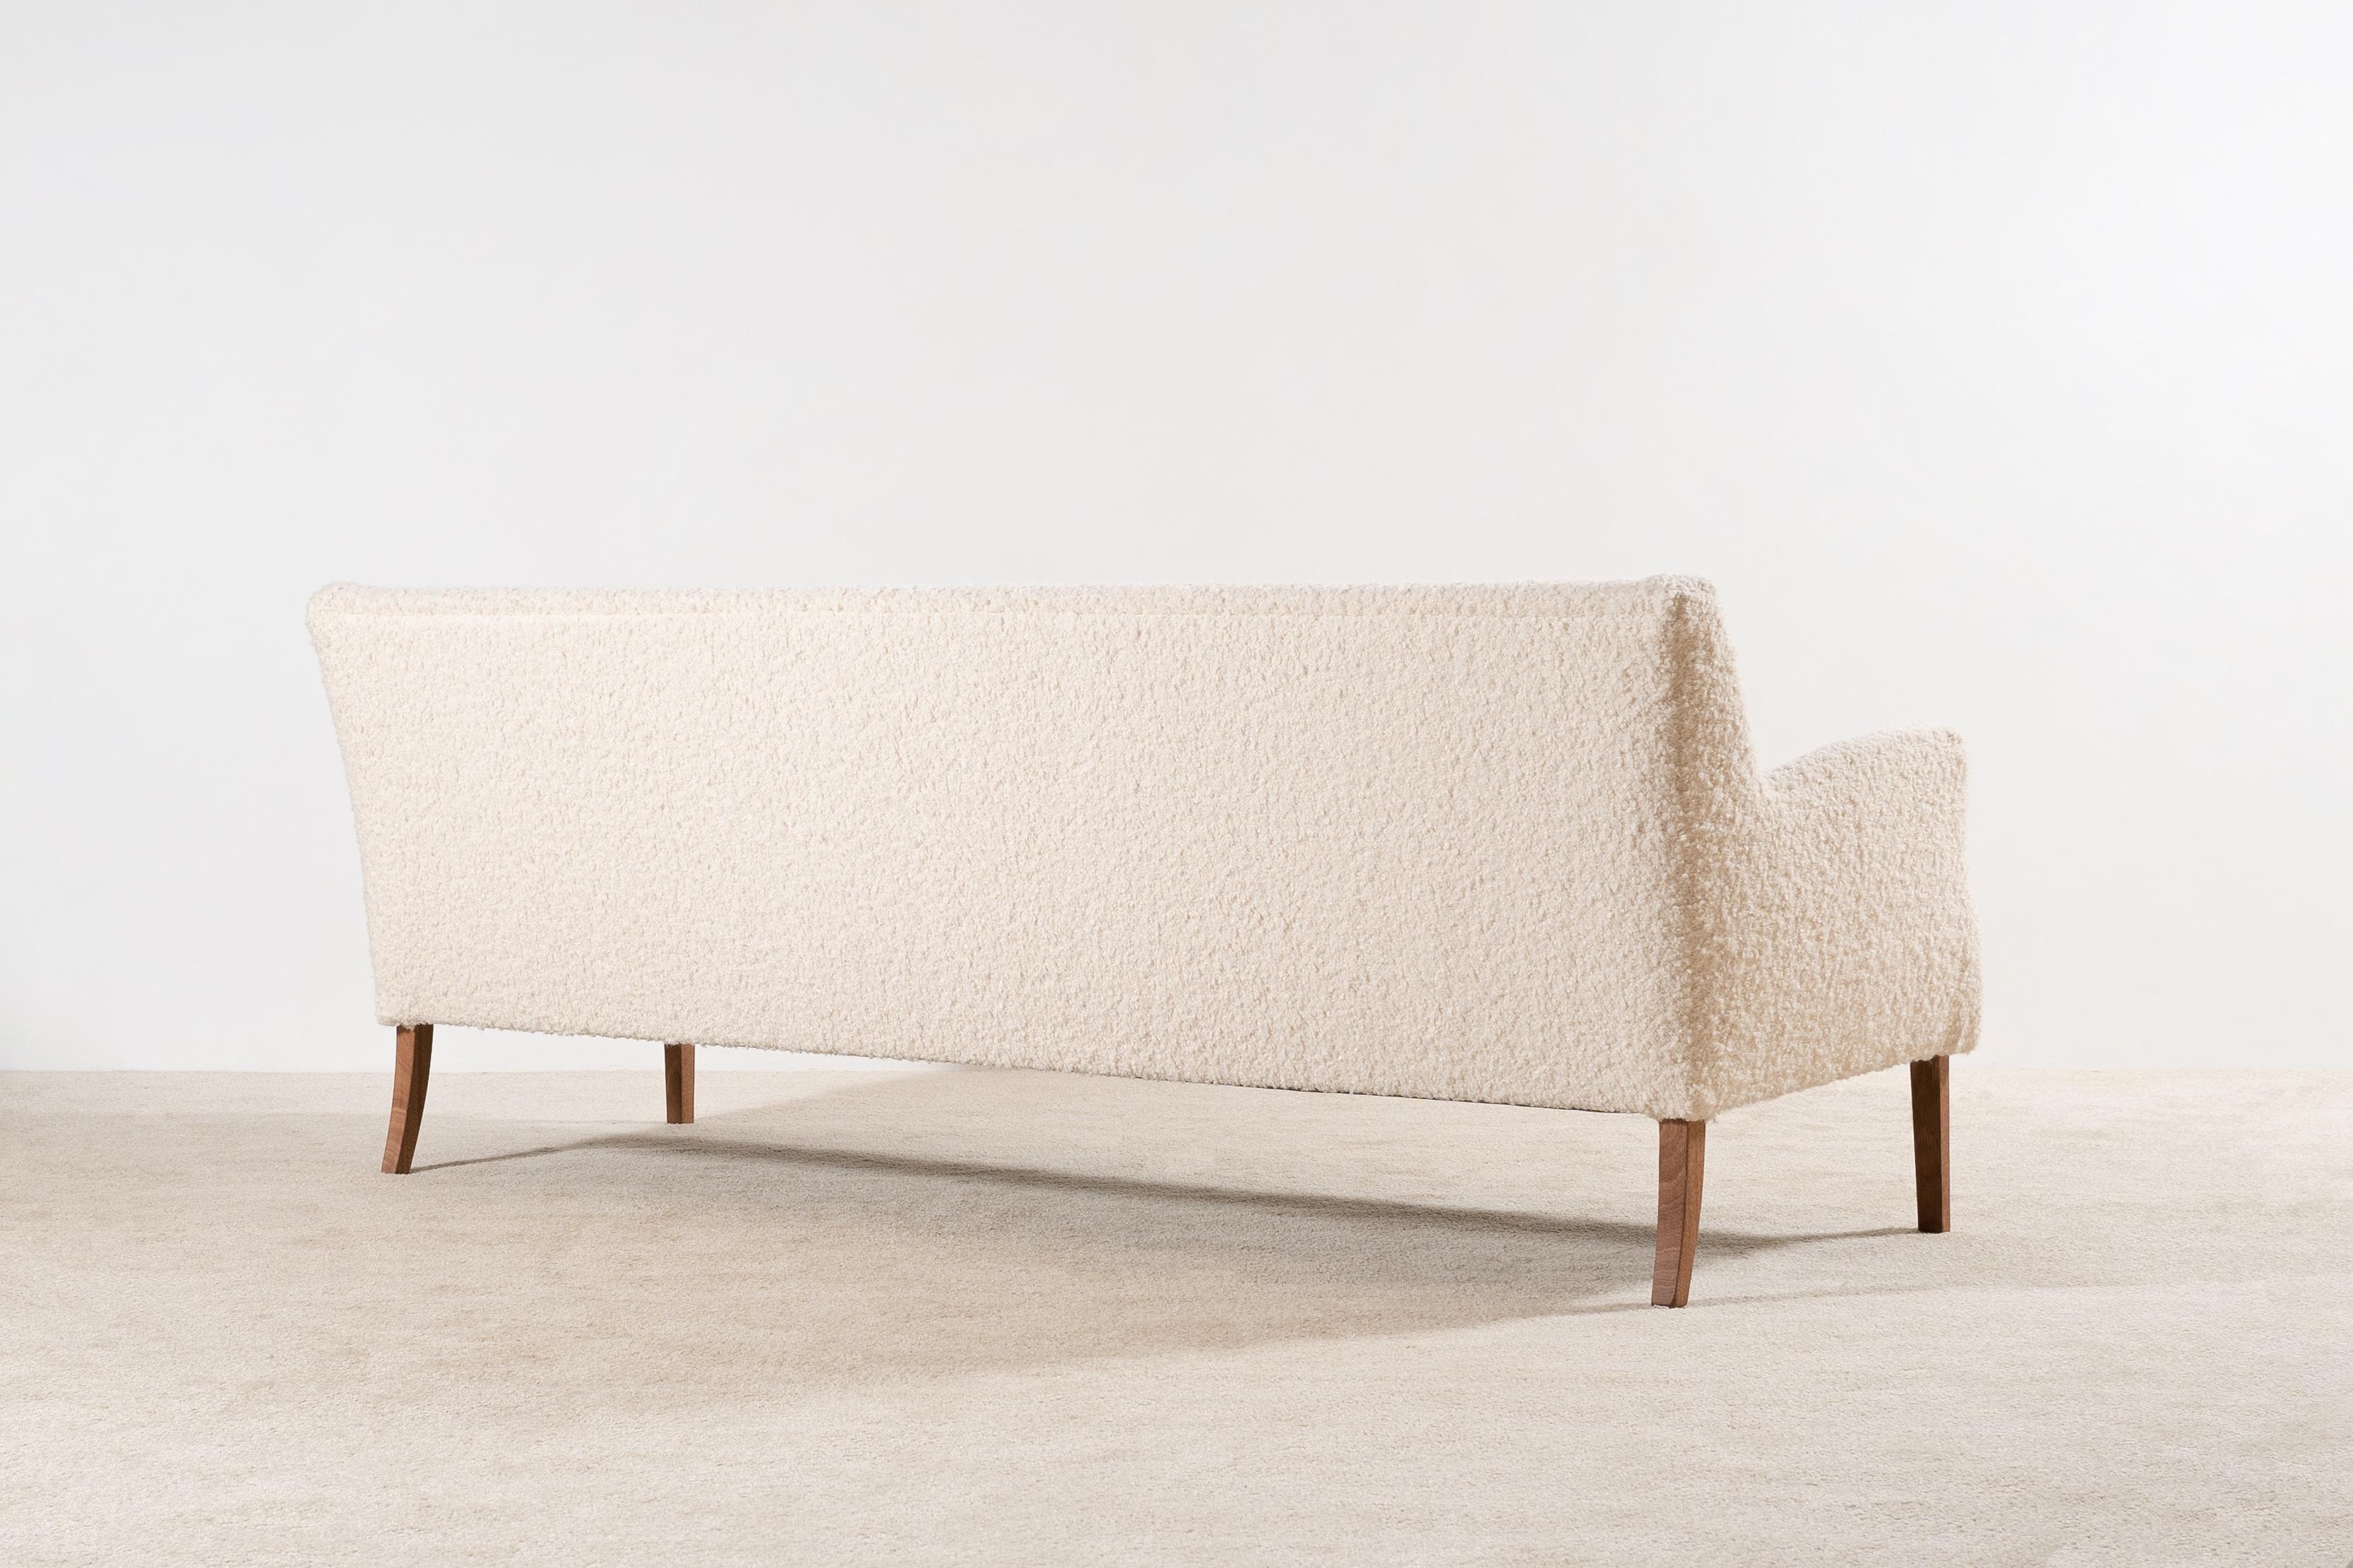 Mid-20th Century Three-Seat Danish Sofa from the 1960s Newly Upholstered